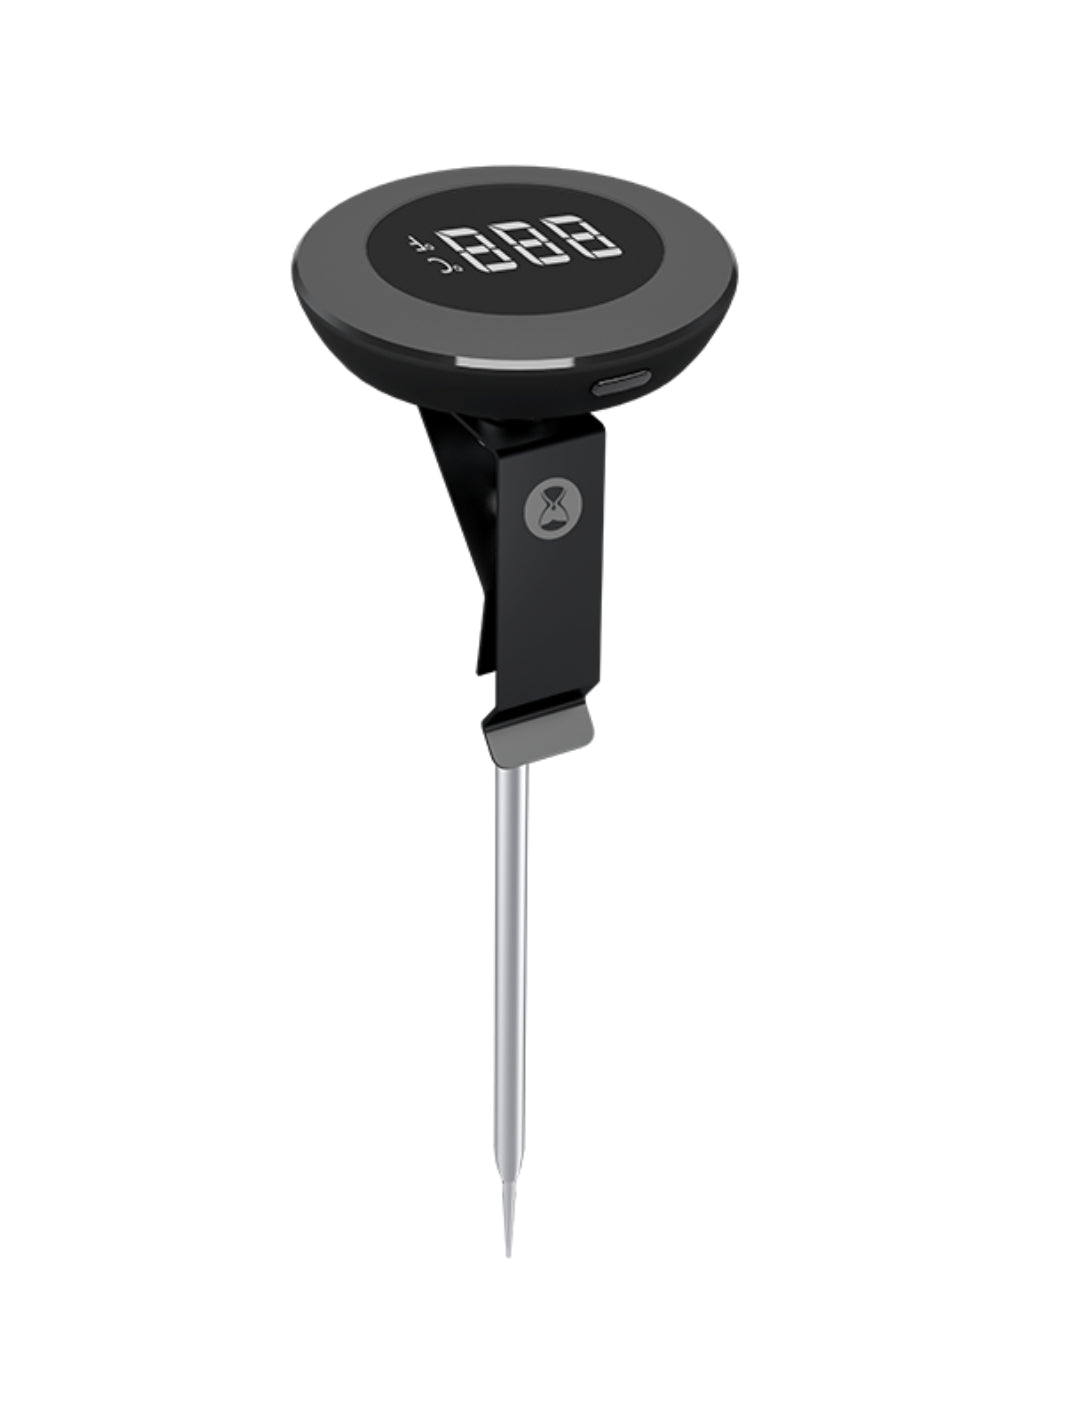 TIMEMORE Digital Thermometer